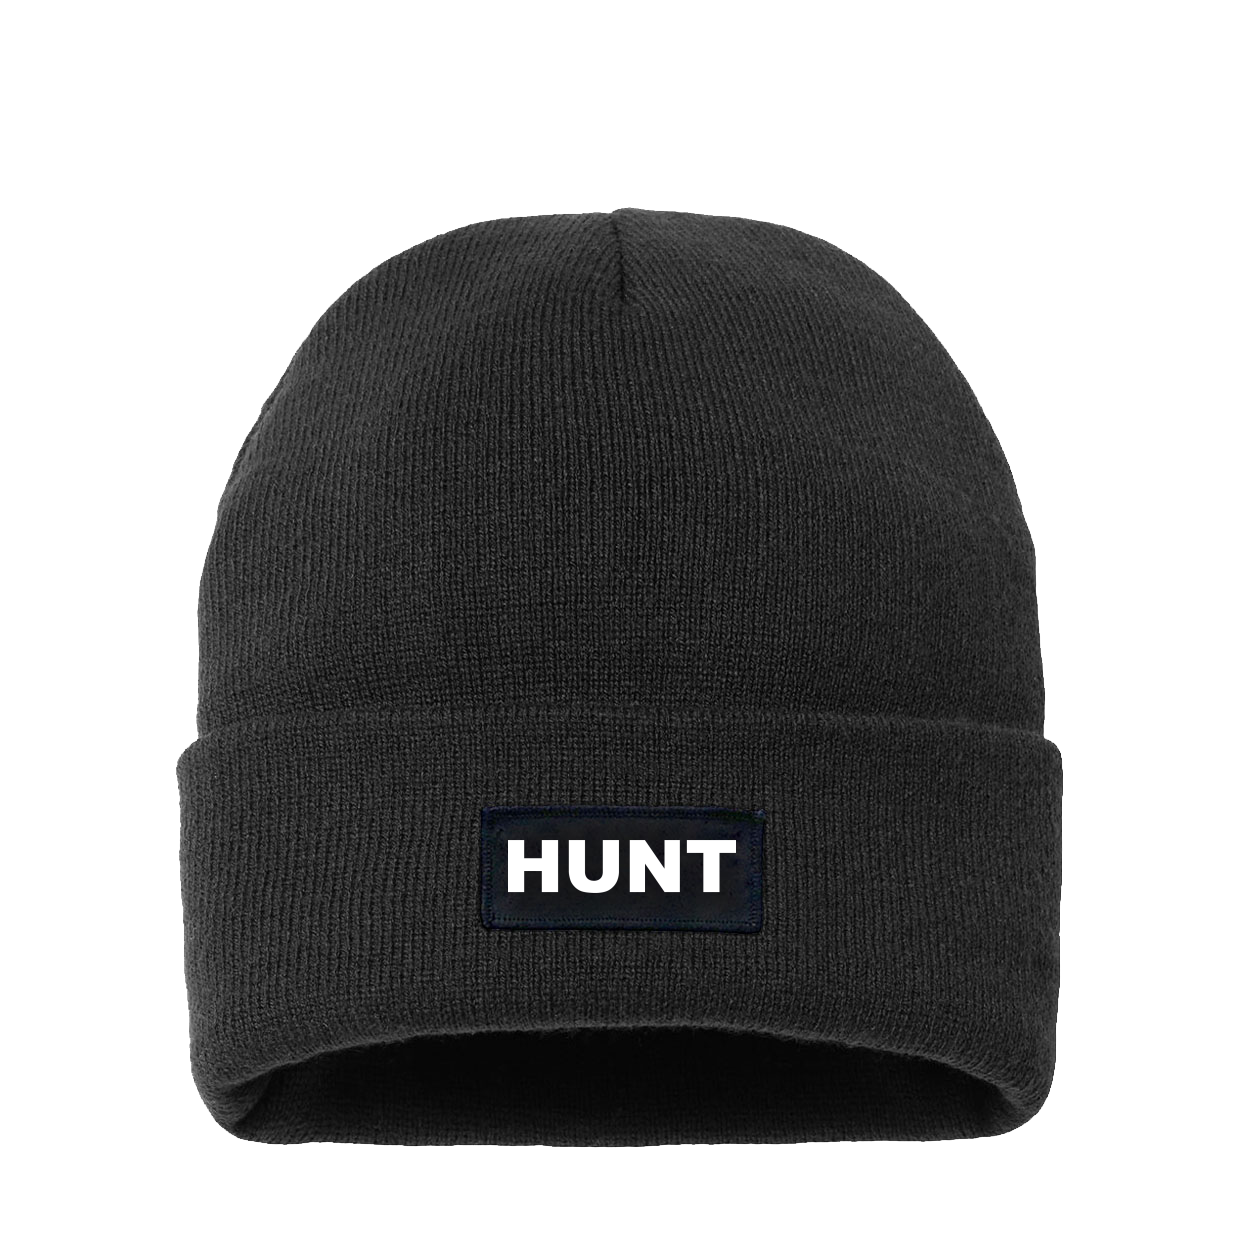 Hunt Brand Logo Night Out Woven Patch Night Out Sherpa Lined Cuffed Beanie Black